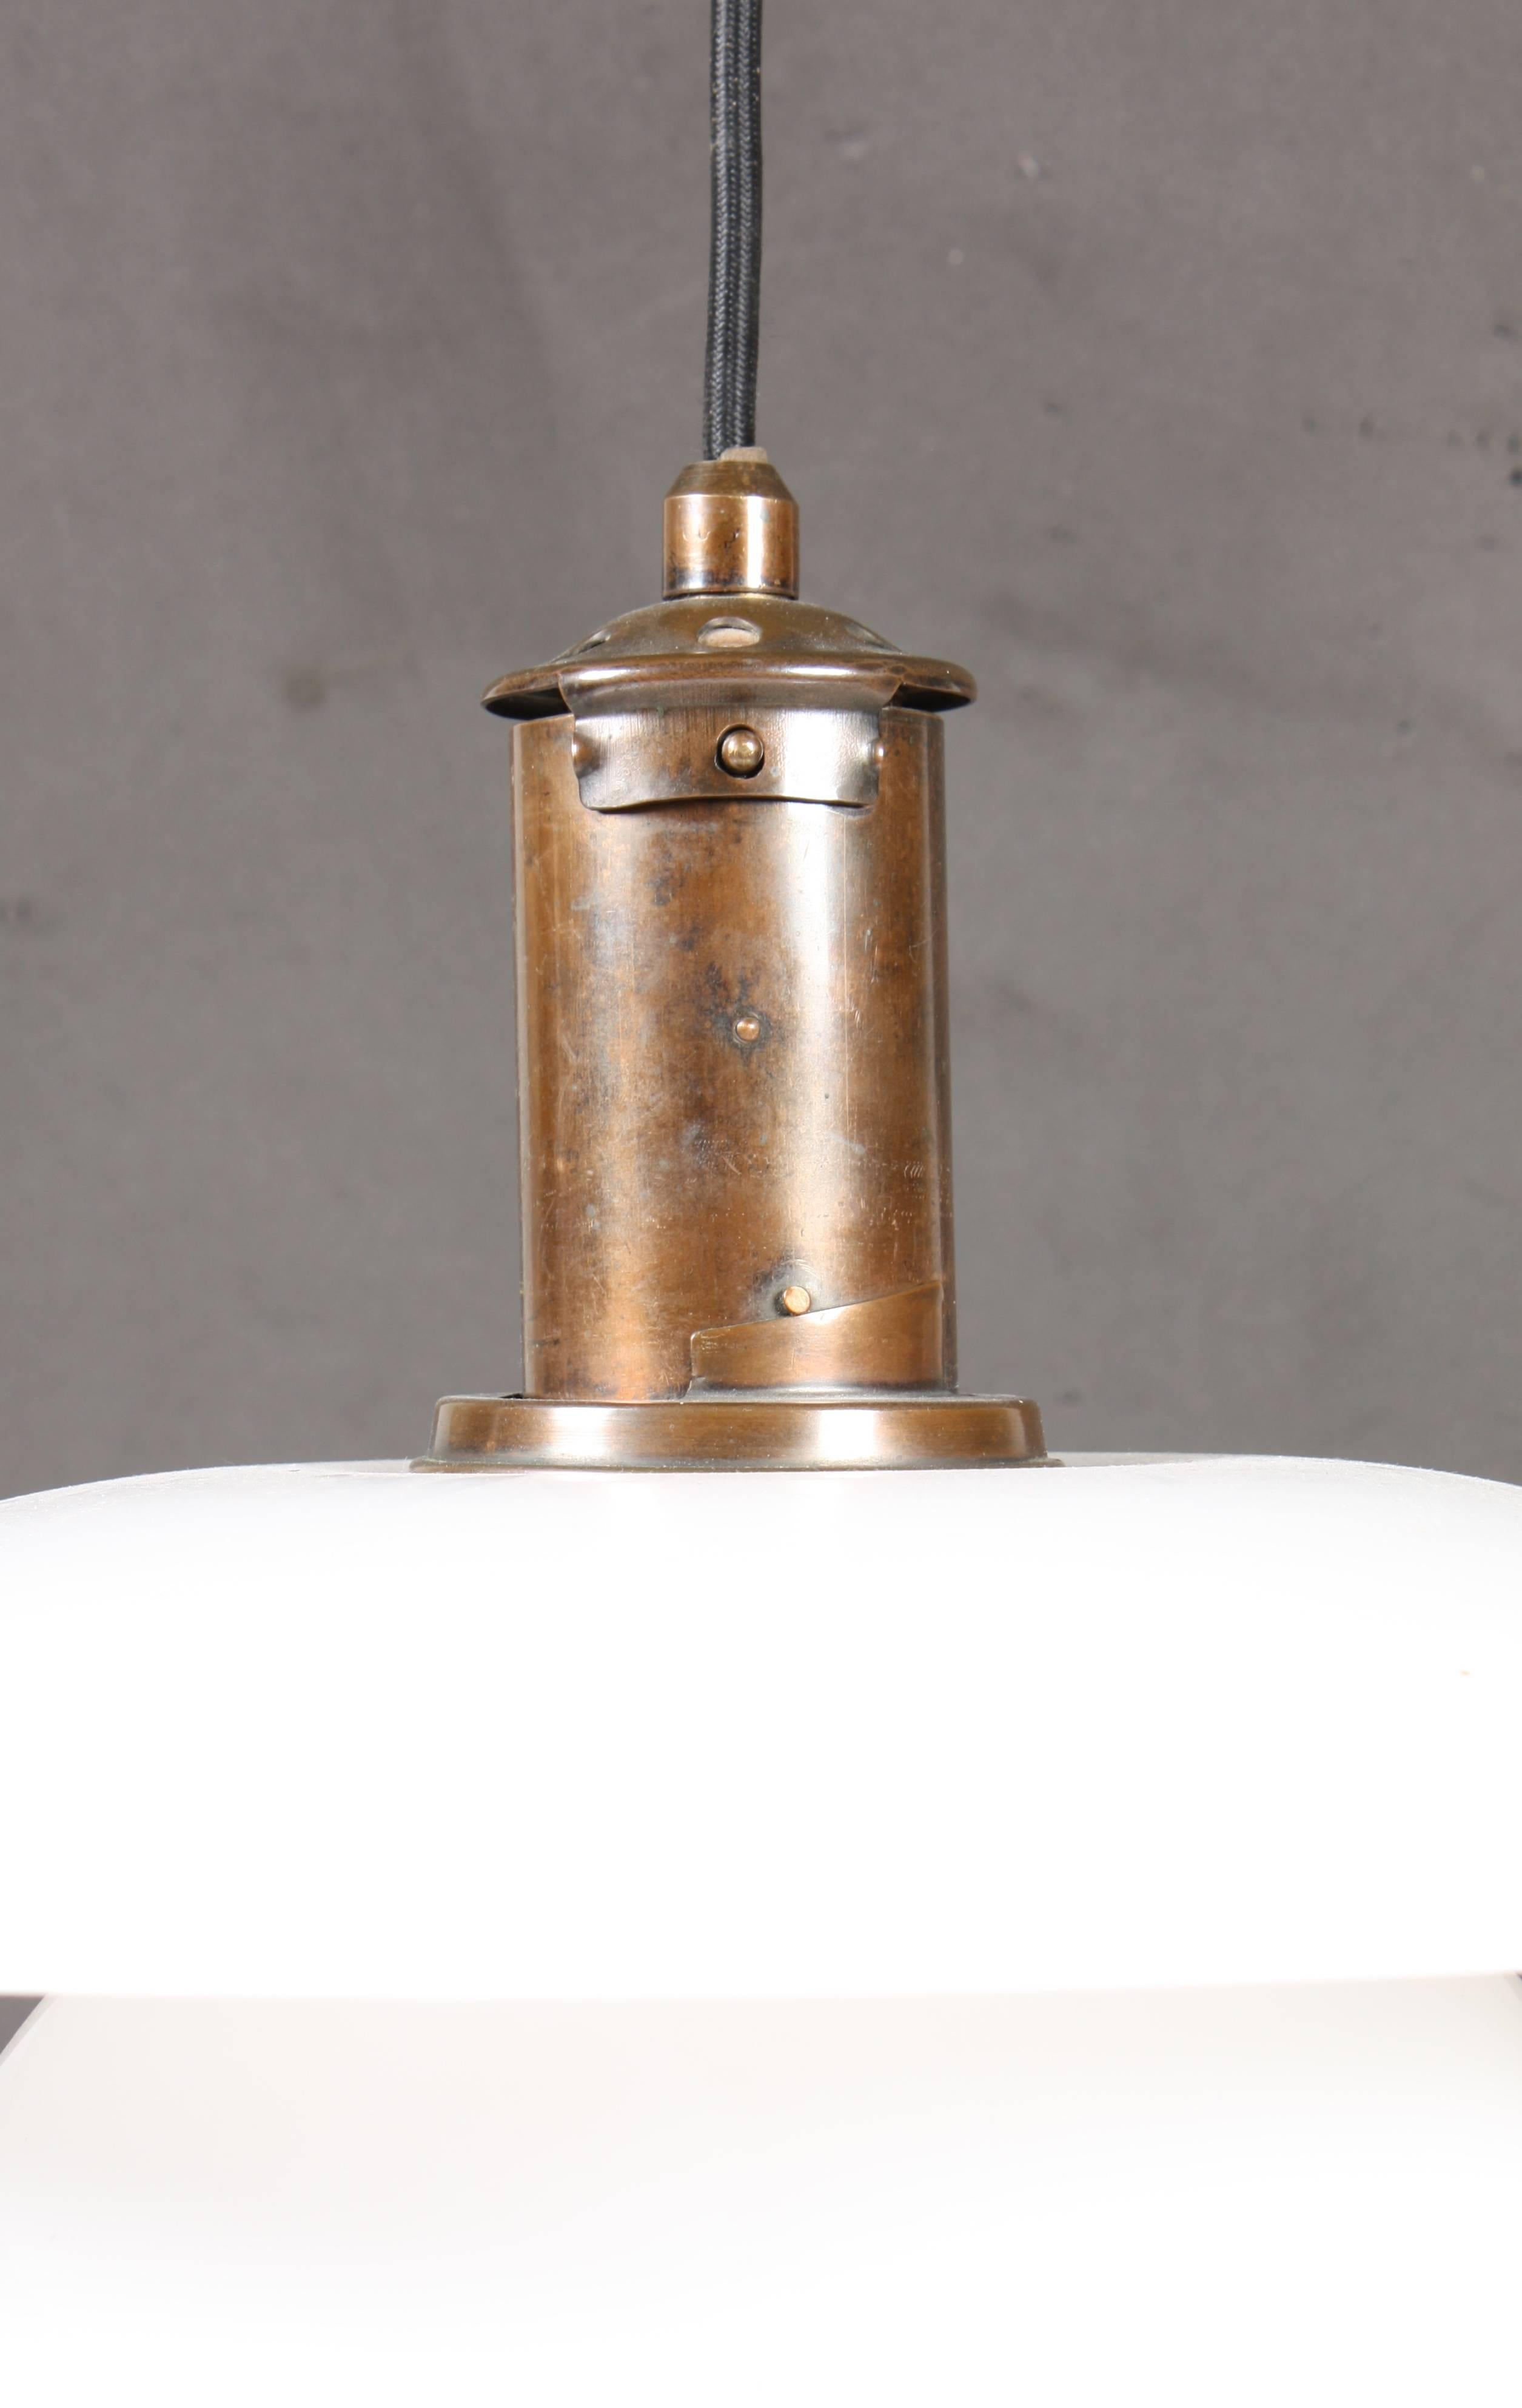 PH-4/4”. Pendant with browned brass socket house, later multi-layer opal glass shades. Manufactured by Louis Poulsen, 1930s.